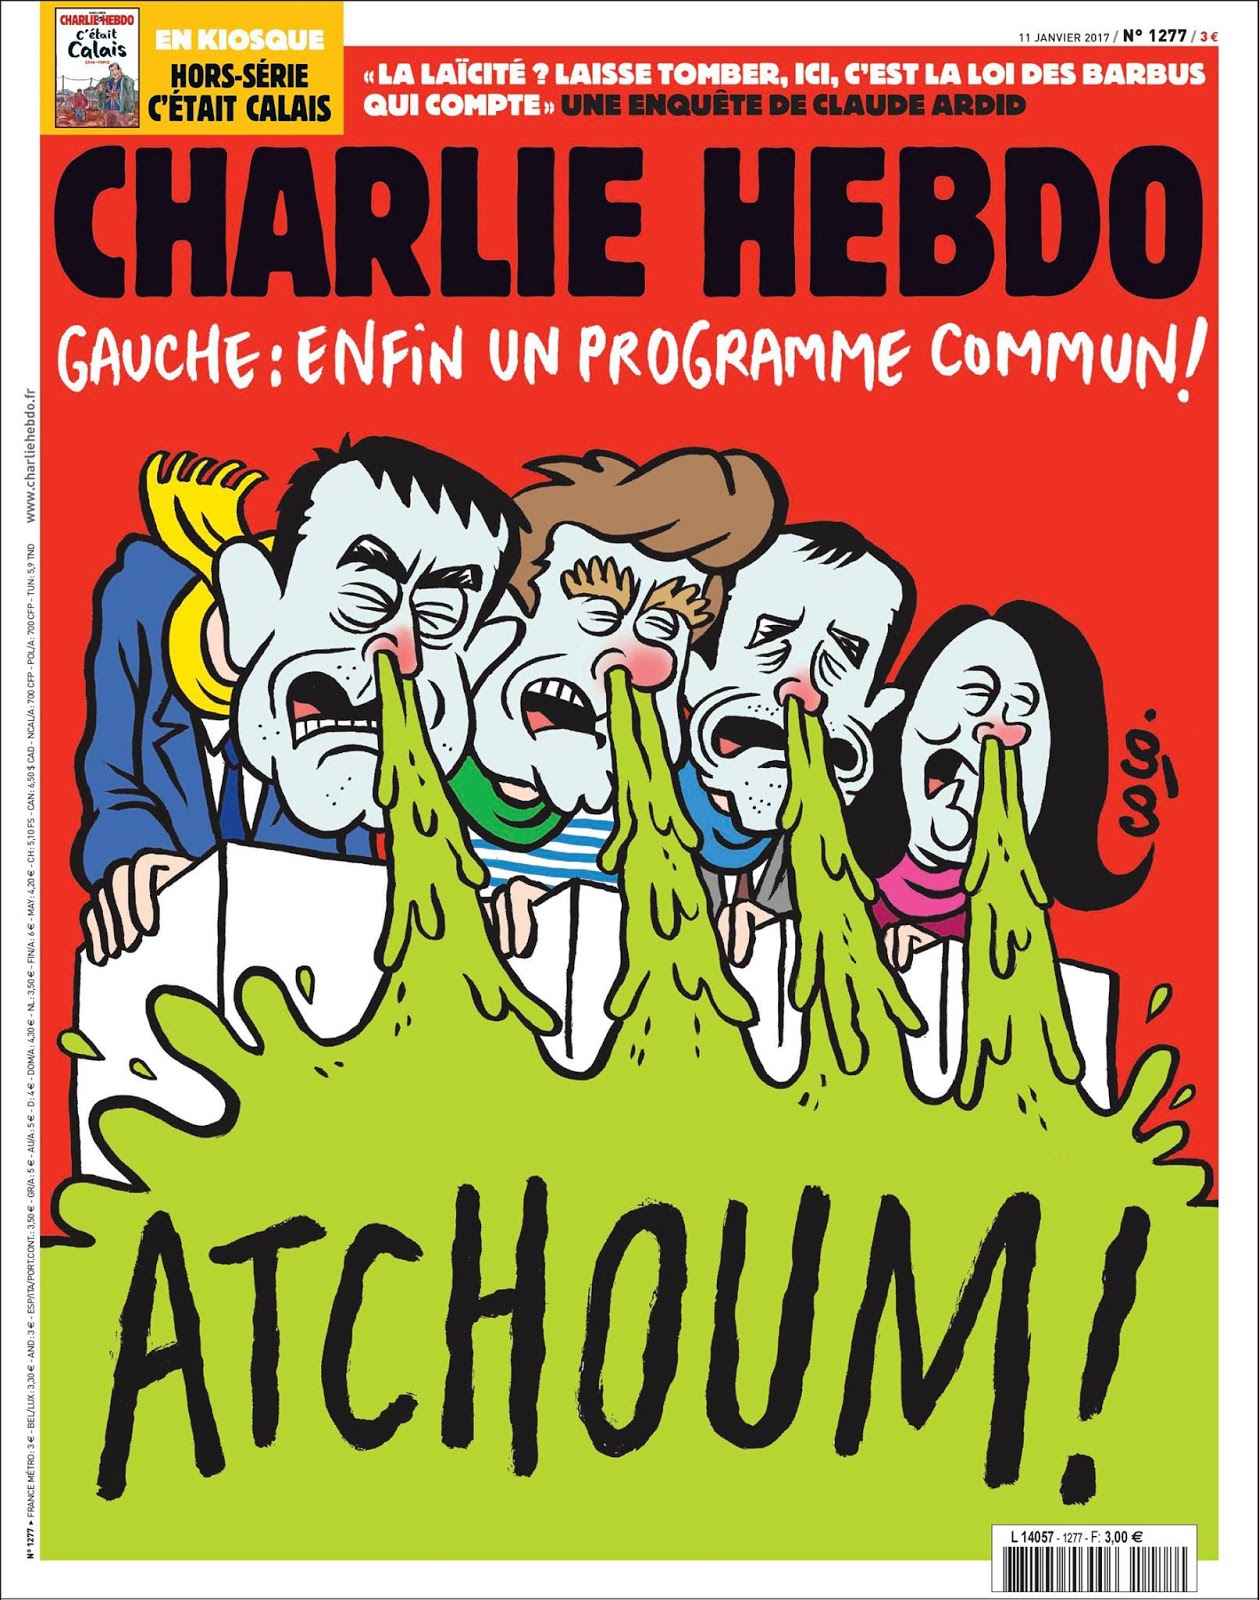 what-are-some-of-charlie-hebdo-s-most-famous-cartoons-the-charlie